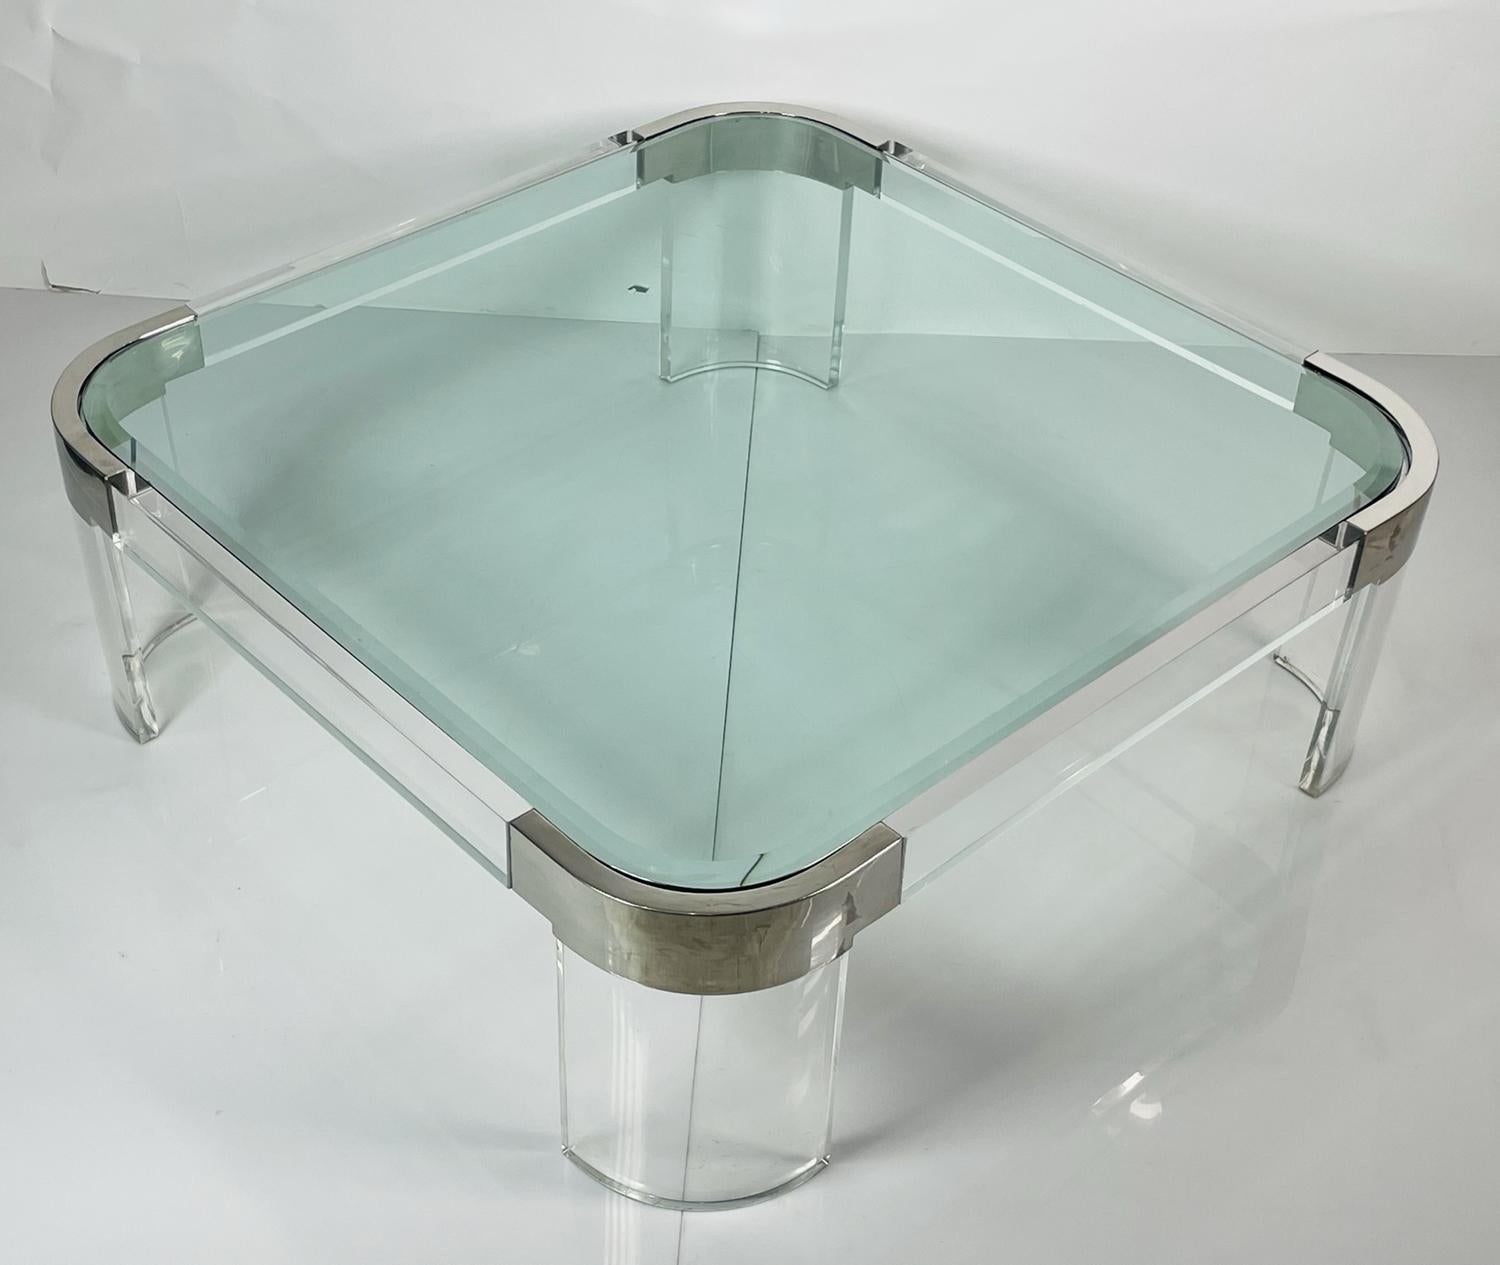 Charles Hollis Jones Waterfall Coffee Table in Lucite, Glass & Polished Nickel For Sale 11